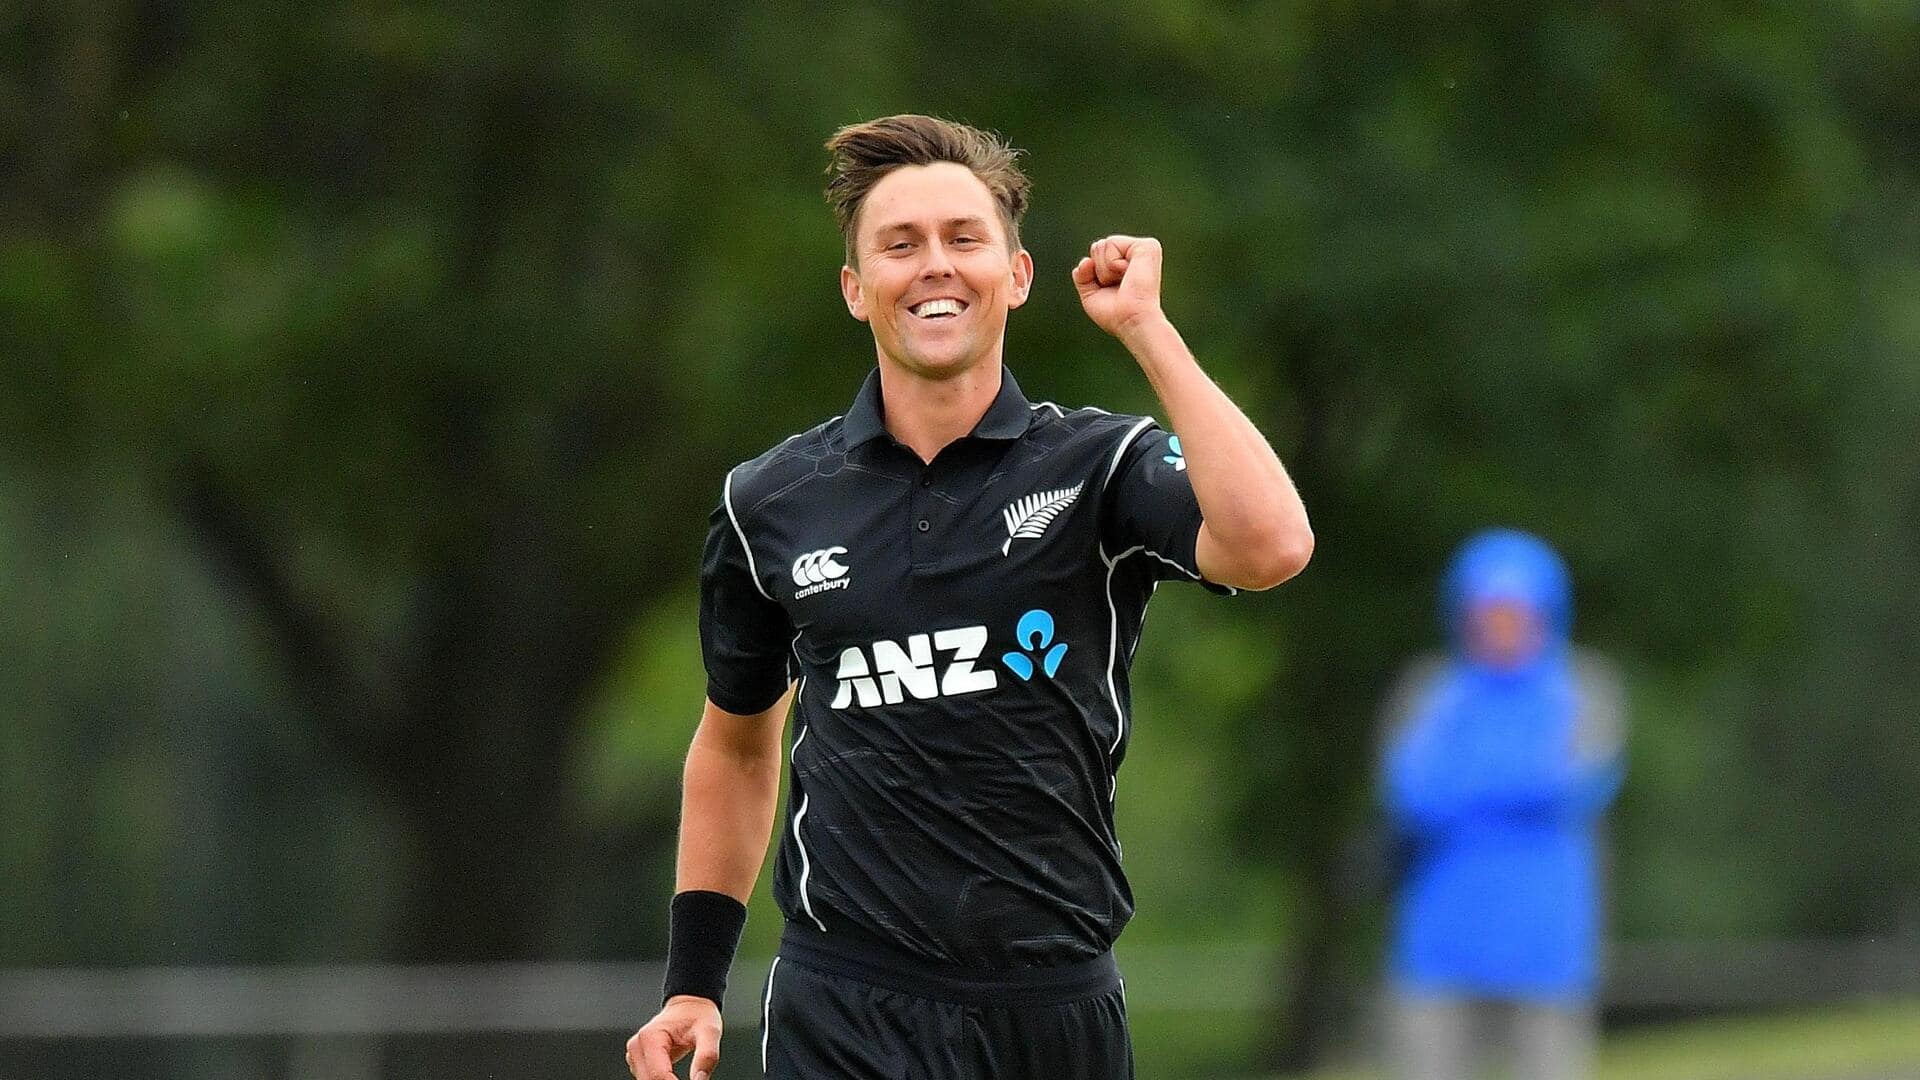 ICC World Cup: Decoding Trent Boult's stats in ODI cricket